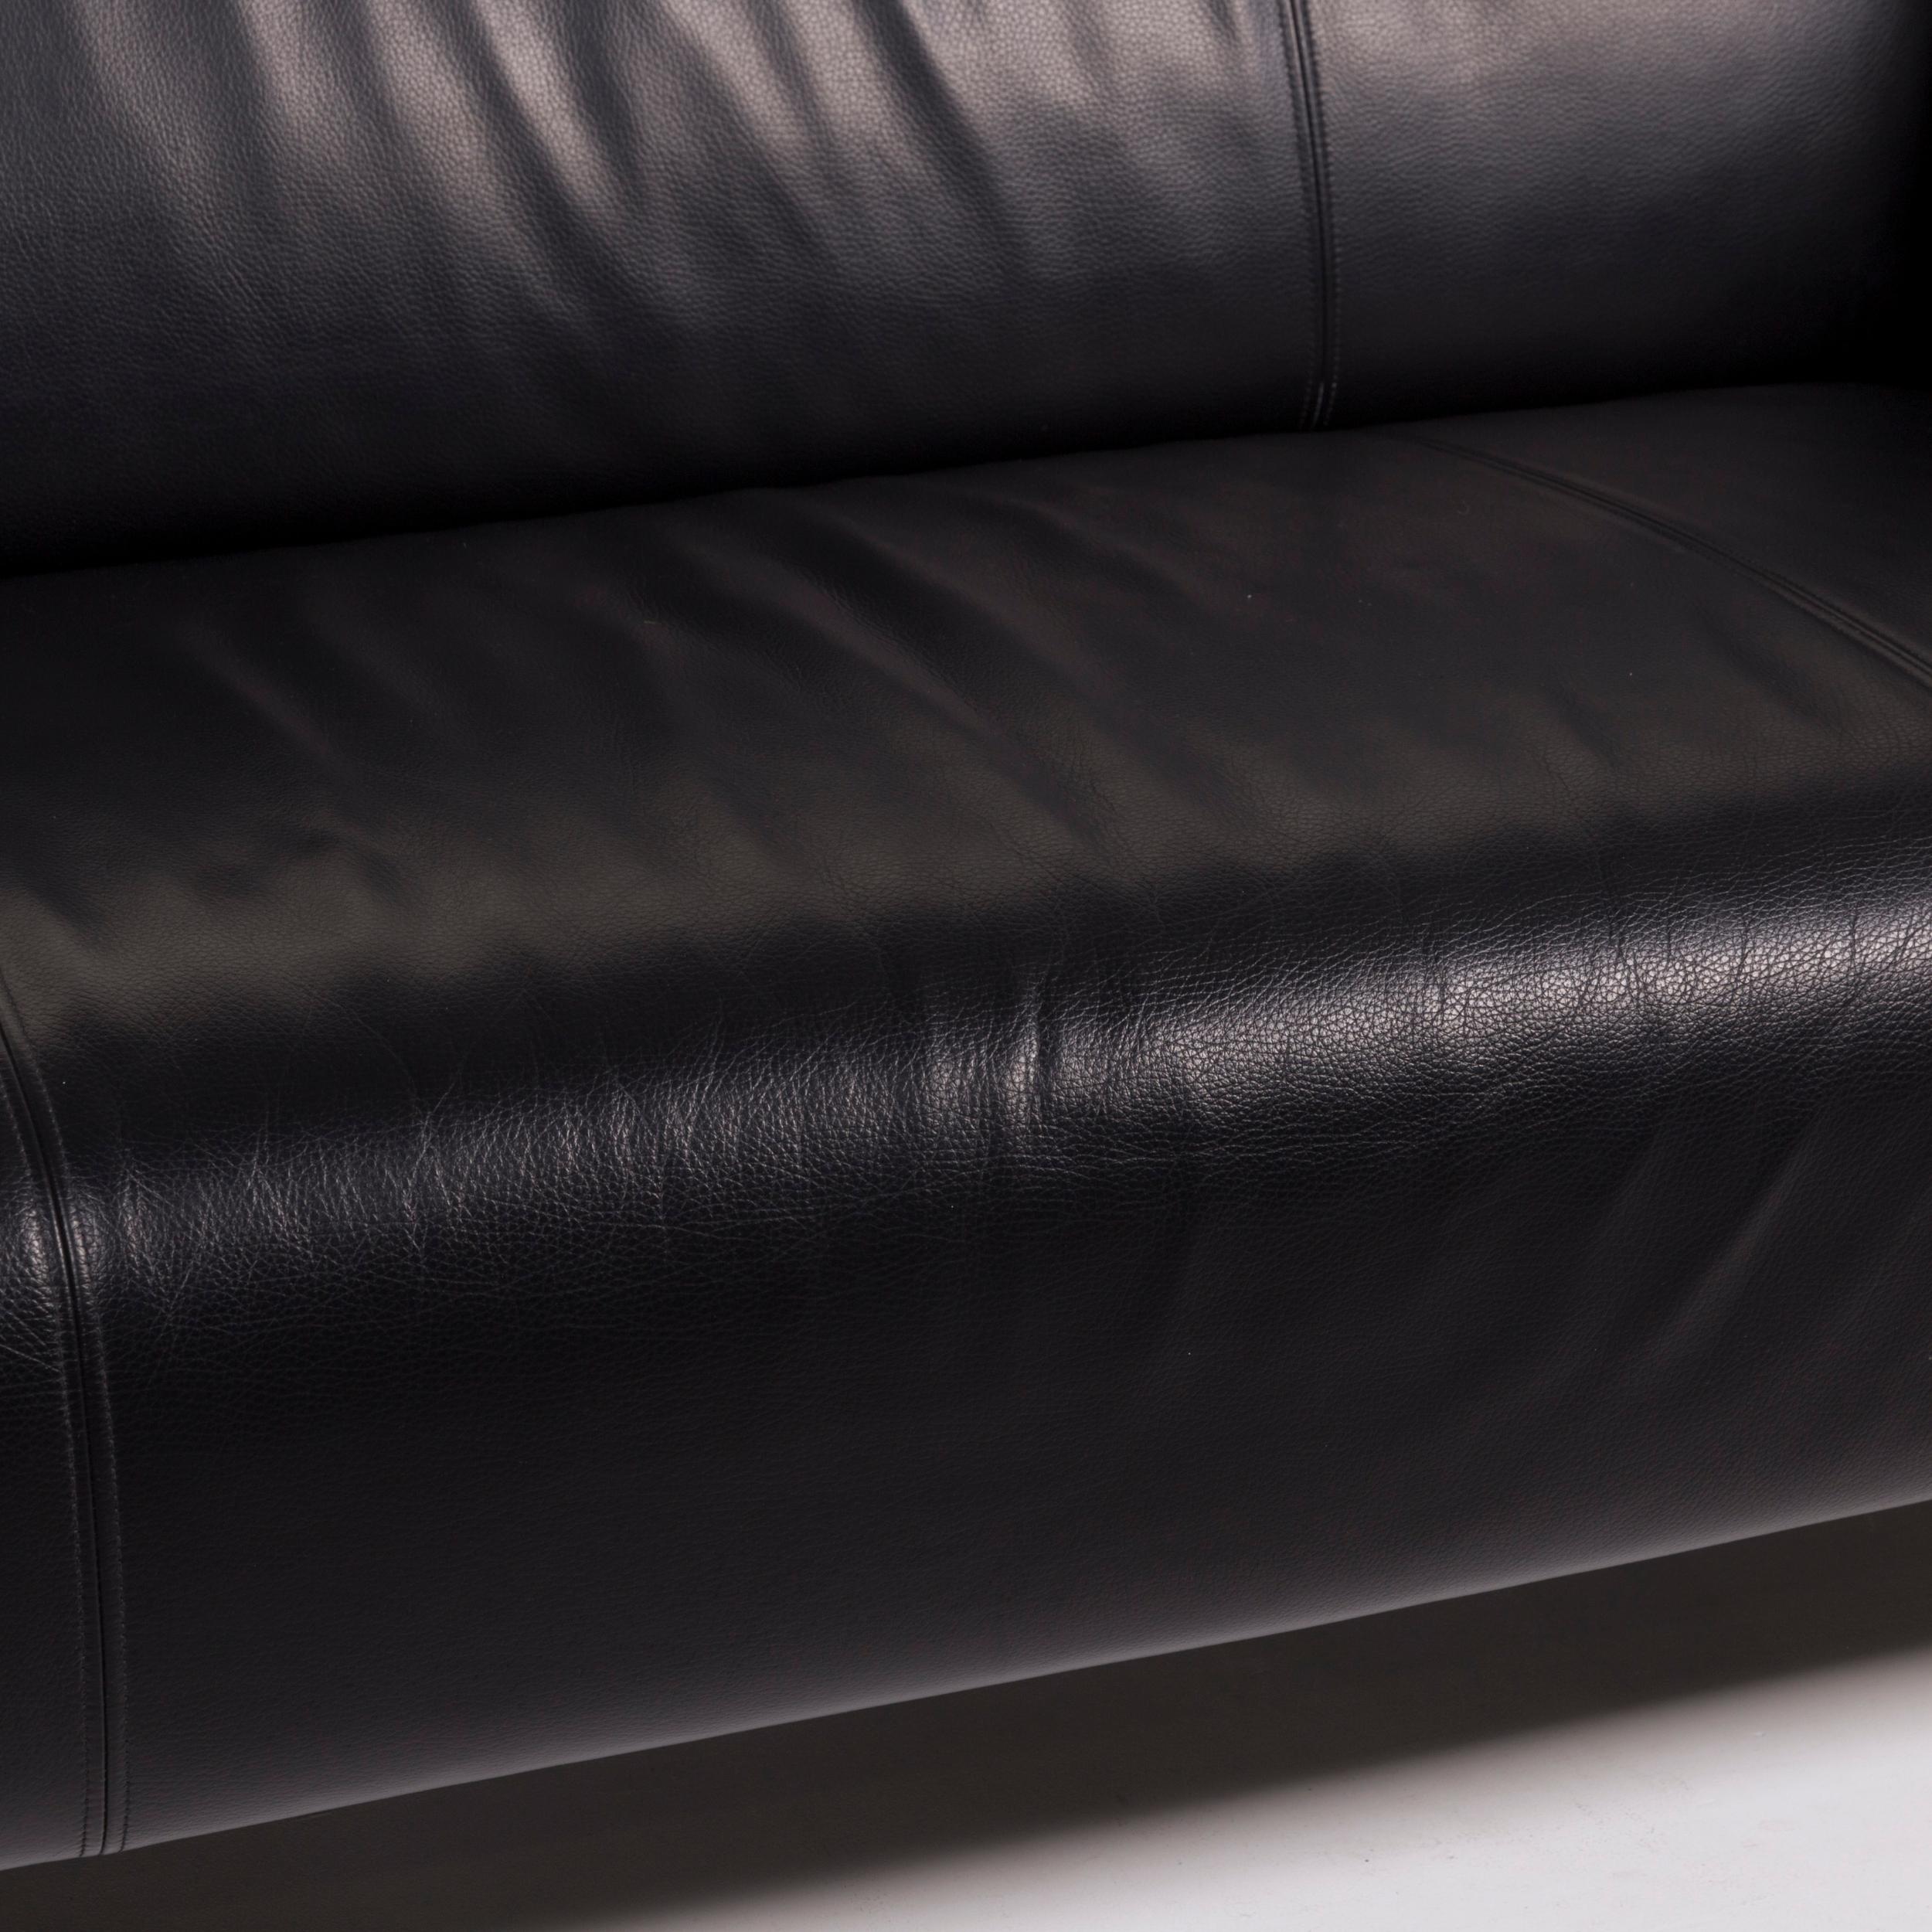 We bring to you a Rolf Benz 322 leather sofa black two-seat.


 Product measurements in centimeters:
 

Depth 88
Width 190
Height 72
Seat-height 38
Rest-height 66
Seat-depth 60
Seat-width 122
Back-height 36.
 